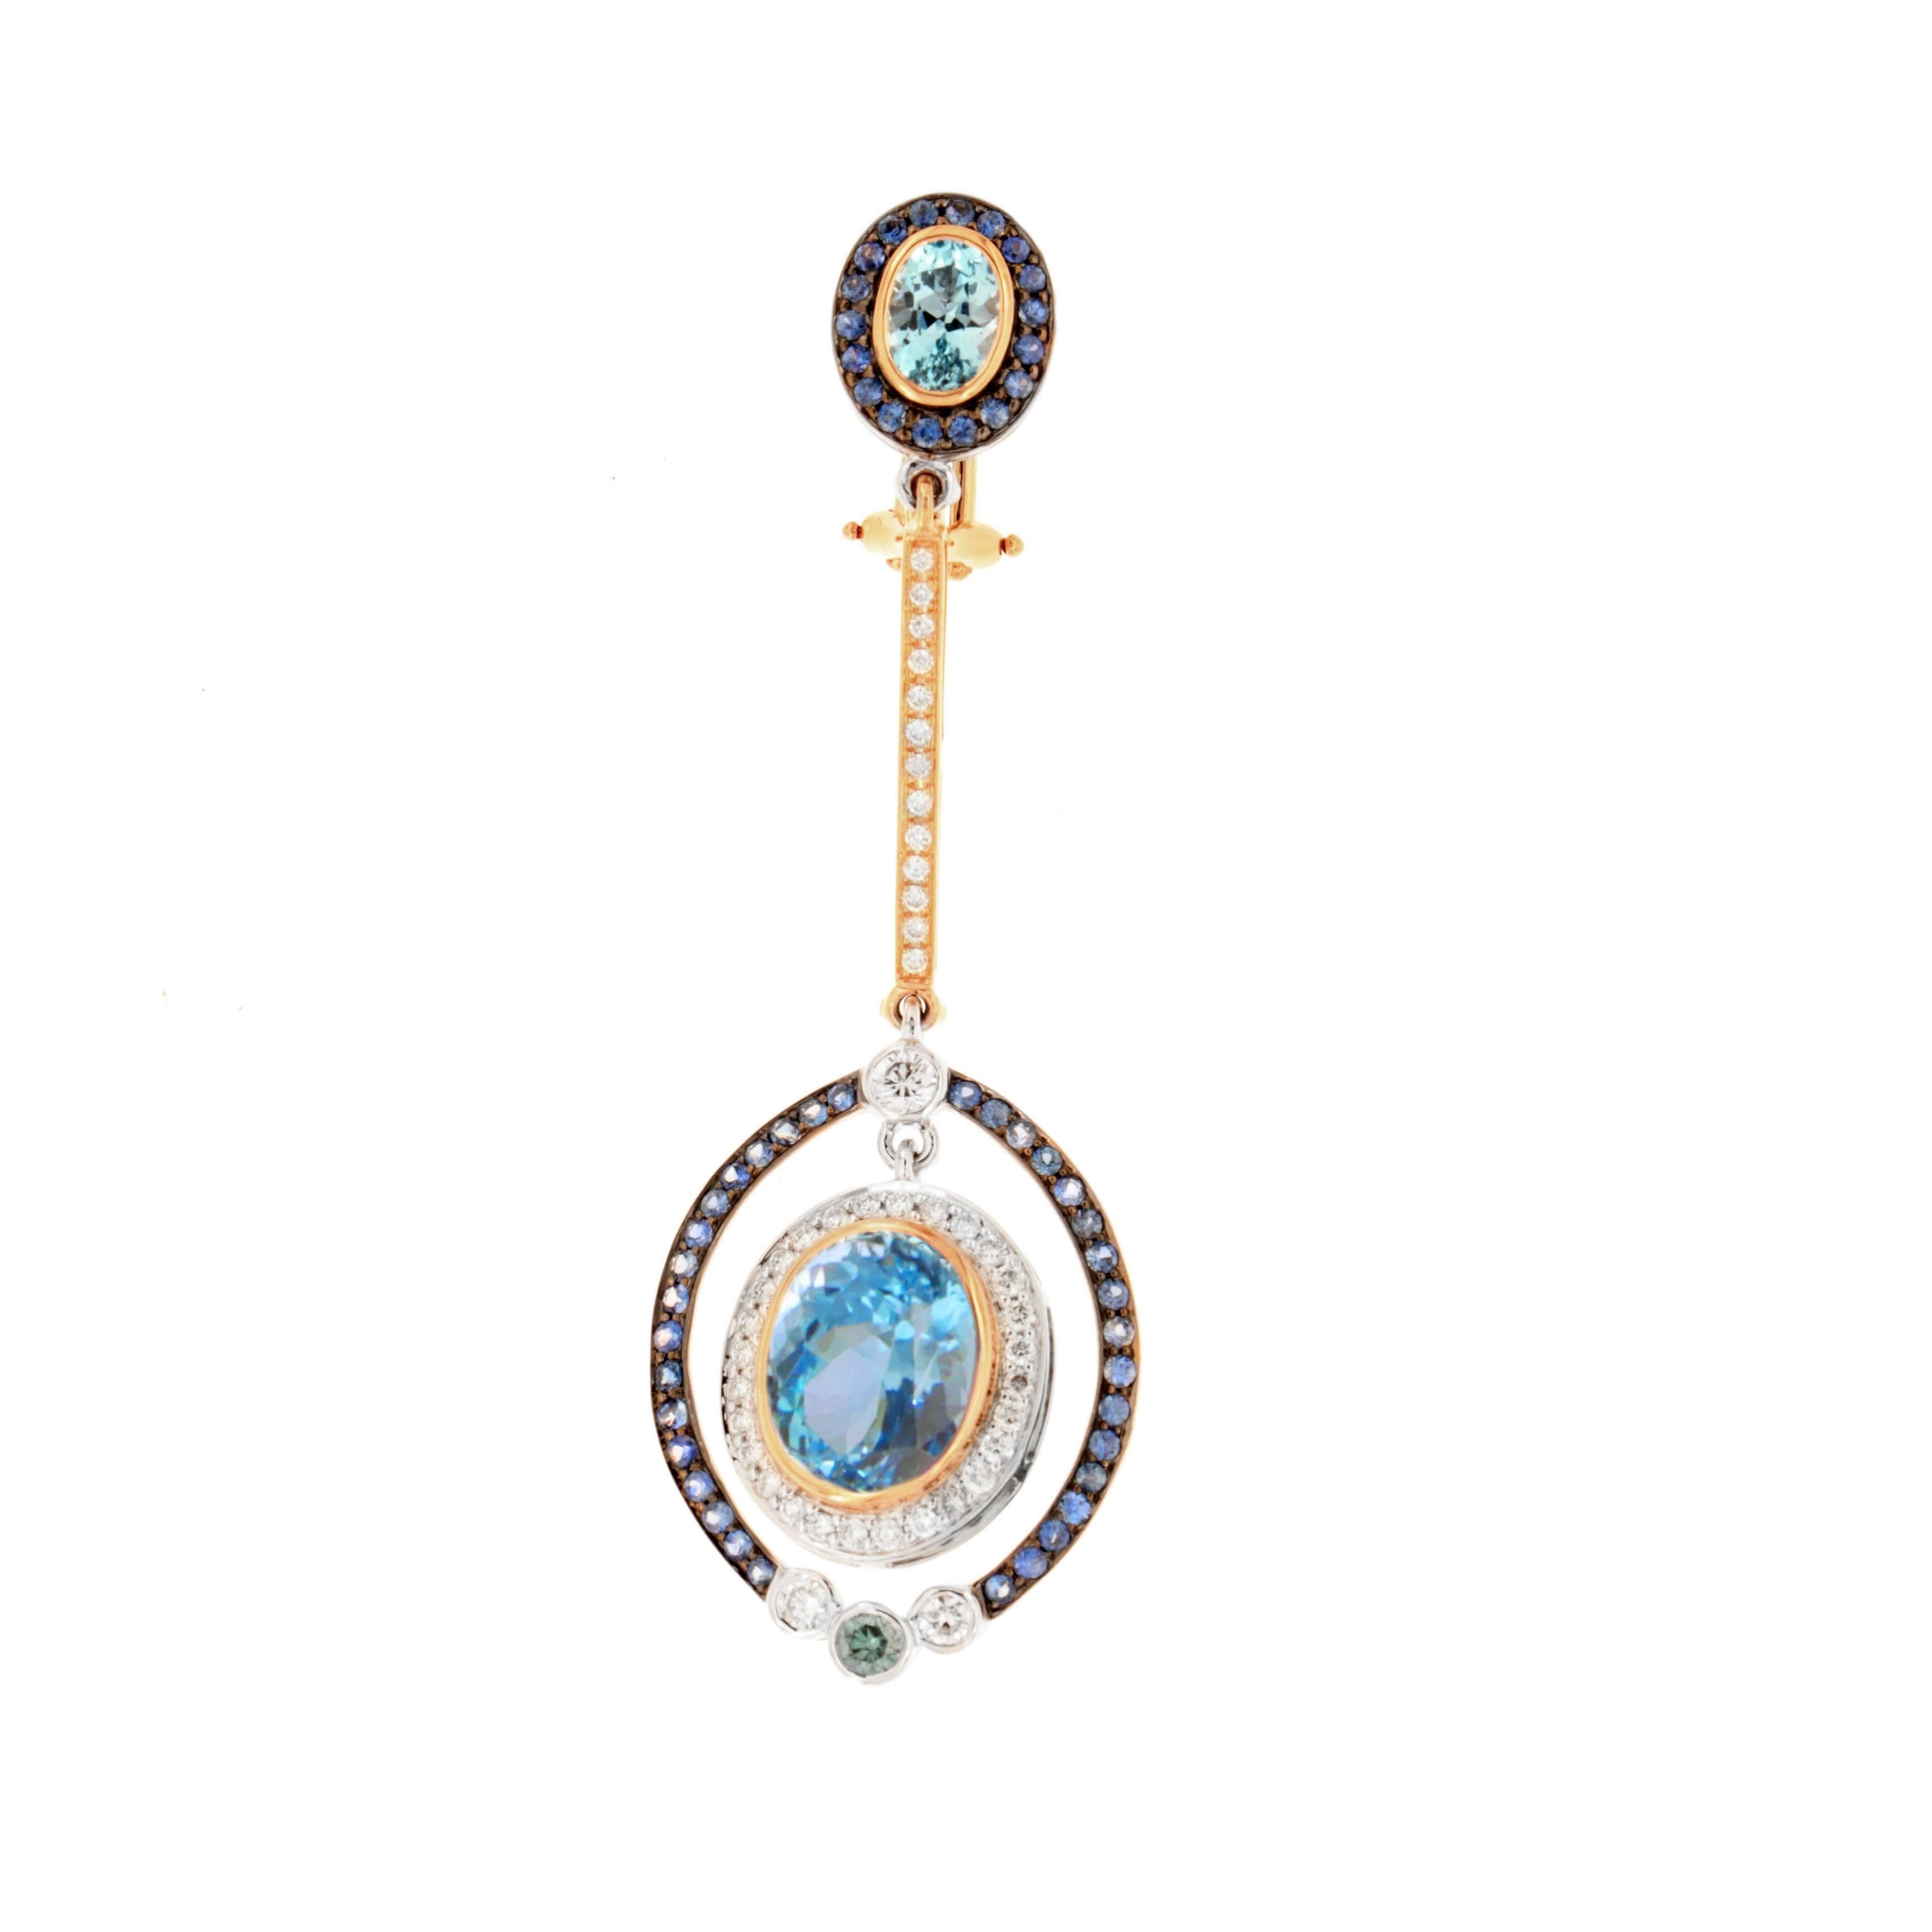 The sun, moon and stars may all be yours with Galaxia earrings, a Zorab Creation.

Designed to elongate the neckline, the universe will surely hang in your very balance. 62.09 carats of faceted blue topaz intermingle with 1.28 carats of white